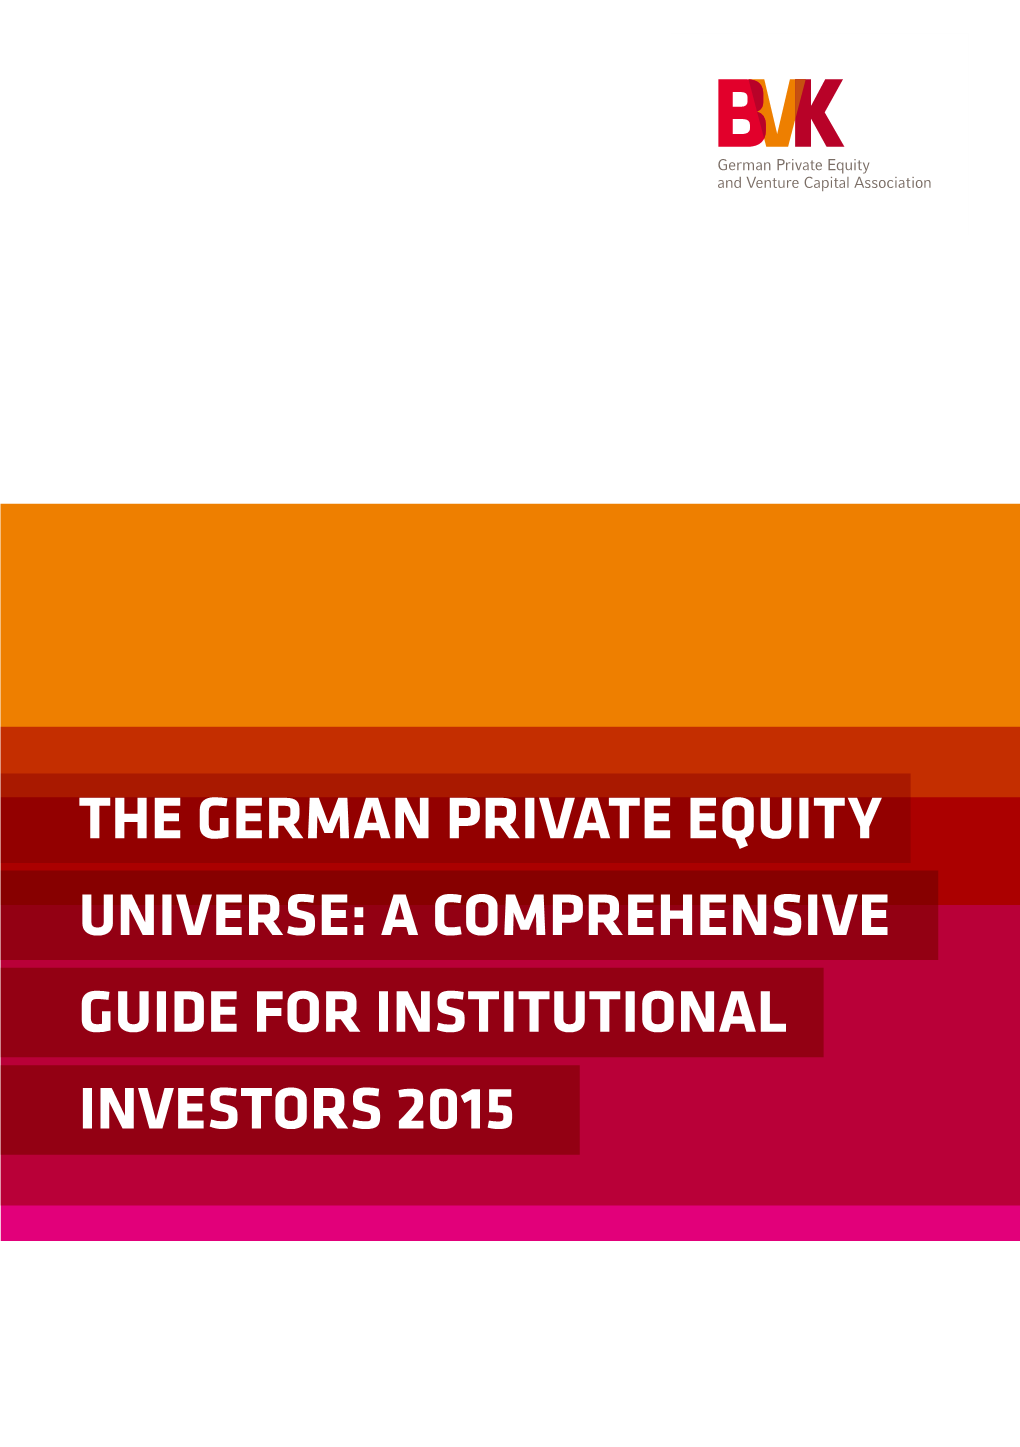 The German Private Equity Universe: a Comprehensive Guide for Institutional Investors 2015